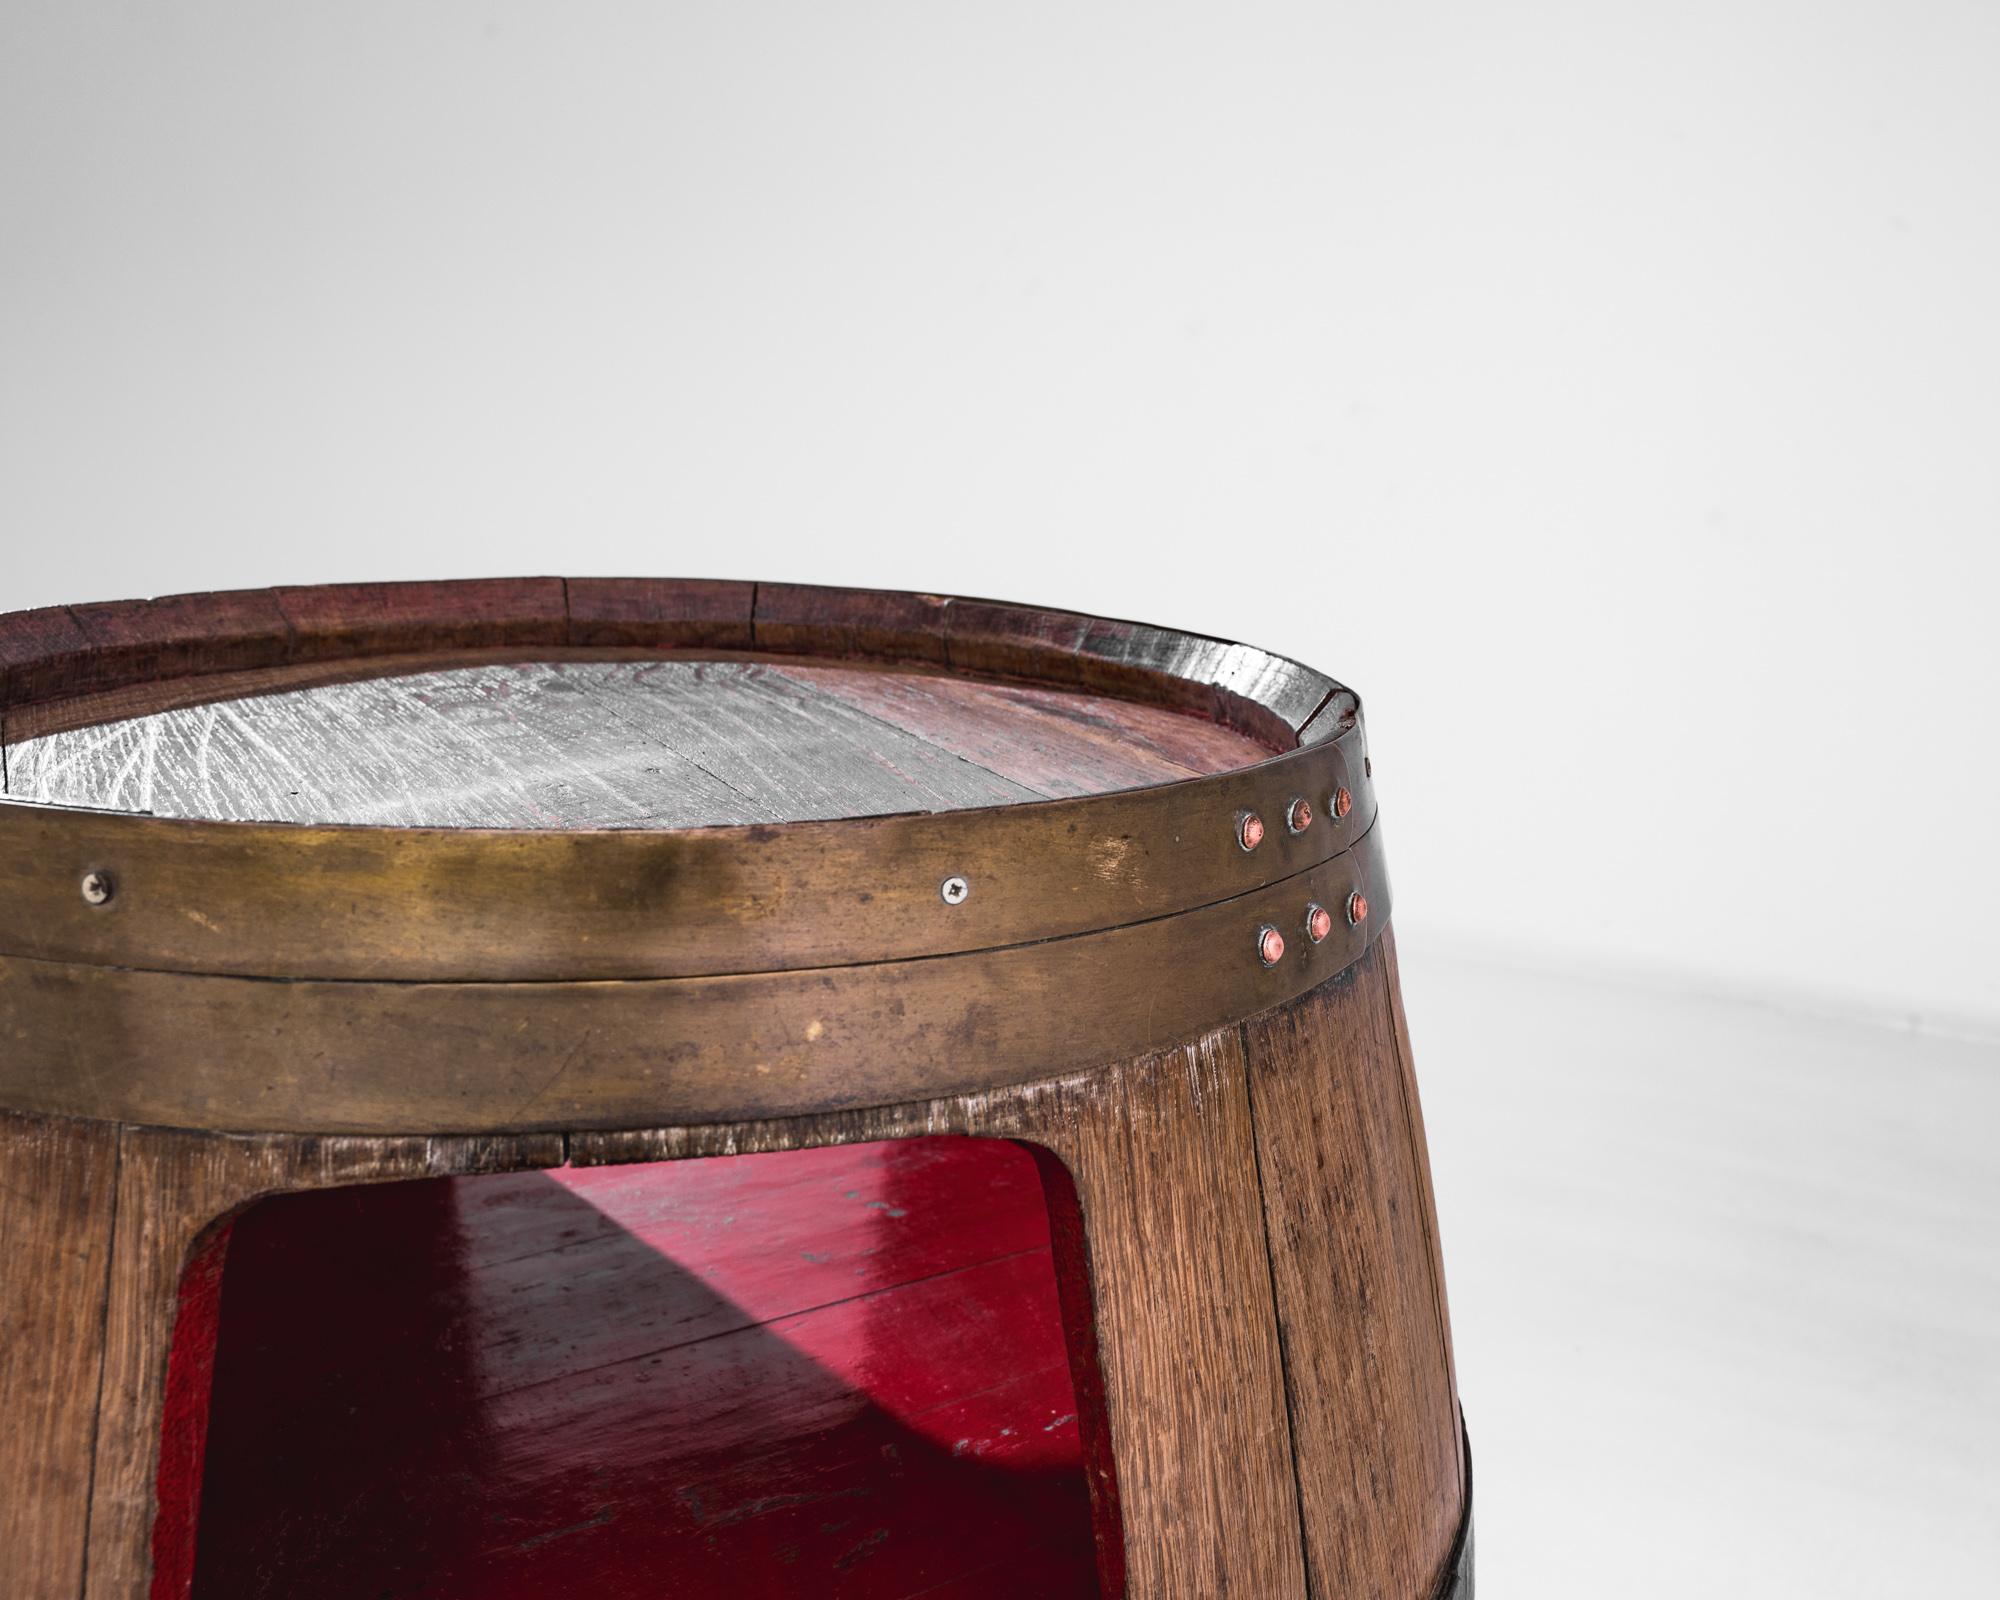 Discover the rustic charm of this authentic 1910s French wooden barrel, a piece that brings the essence of the French countryside into your space. Crafted with care from sturdy wood, this barrel features original metal banding that speaks to its